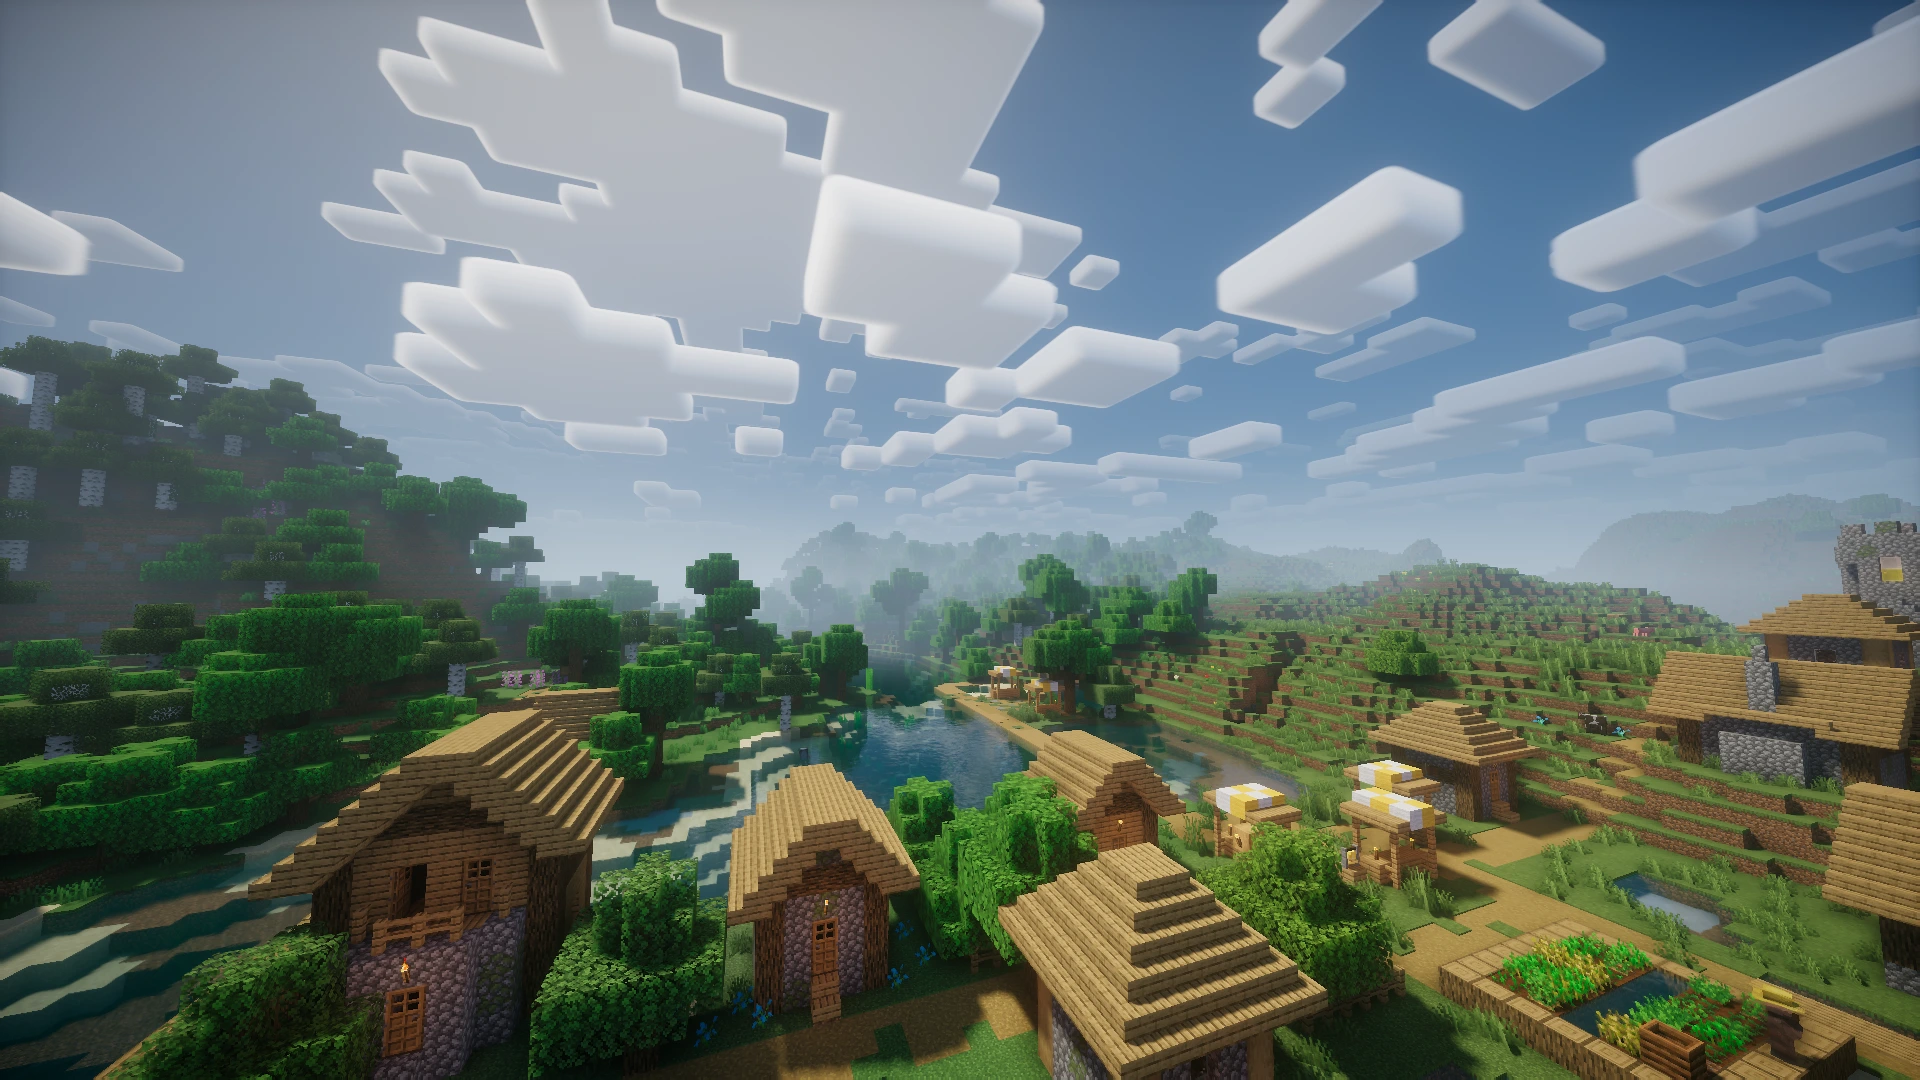 Bird's-eye of a Minecraft village with a lake and a forest in the background with Nostalgia Shader